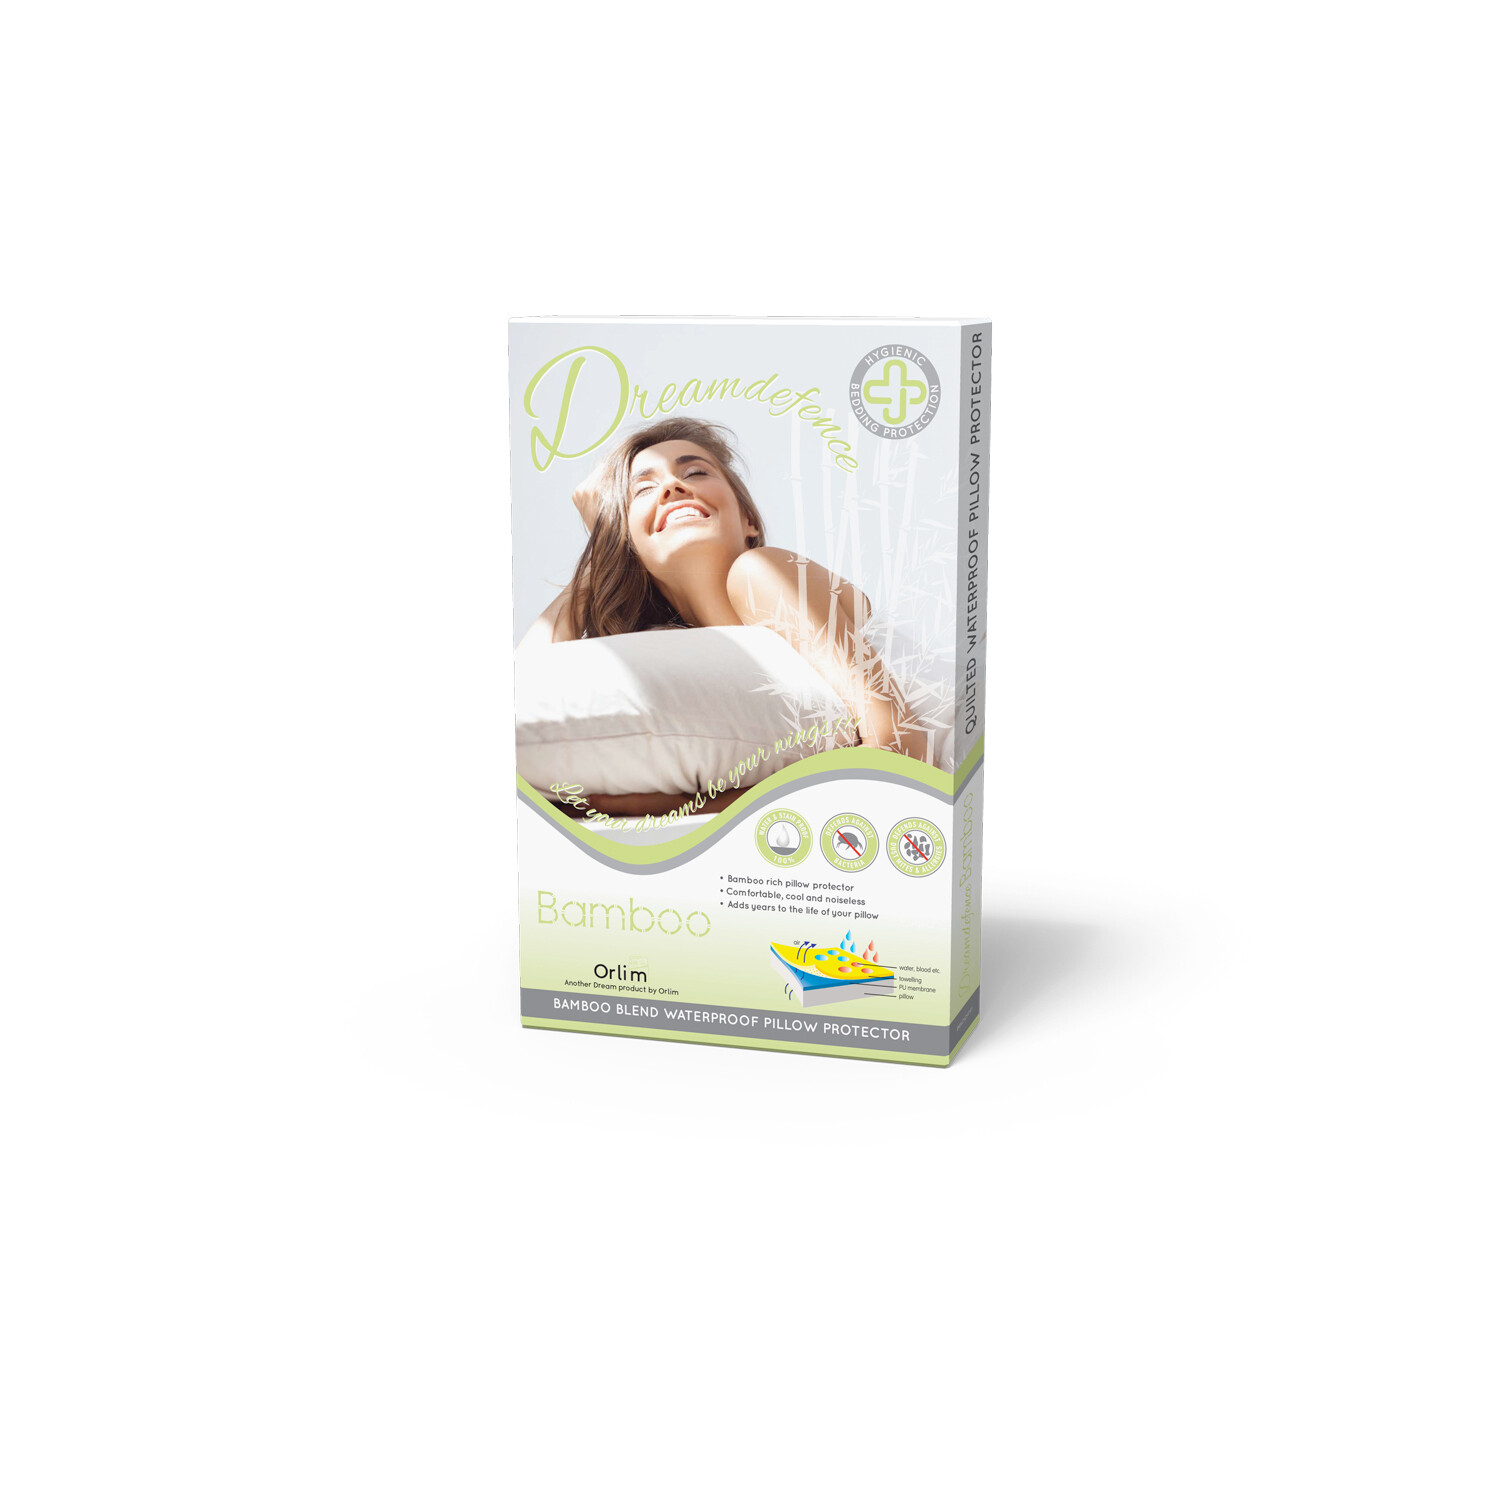 DreamDefence Bamboo Blend Waterproof Pillow Protector